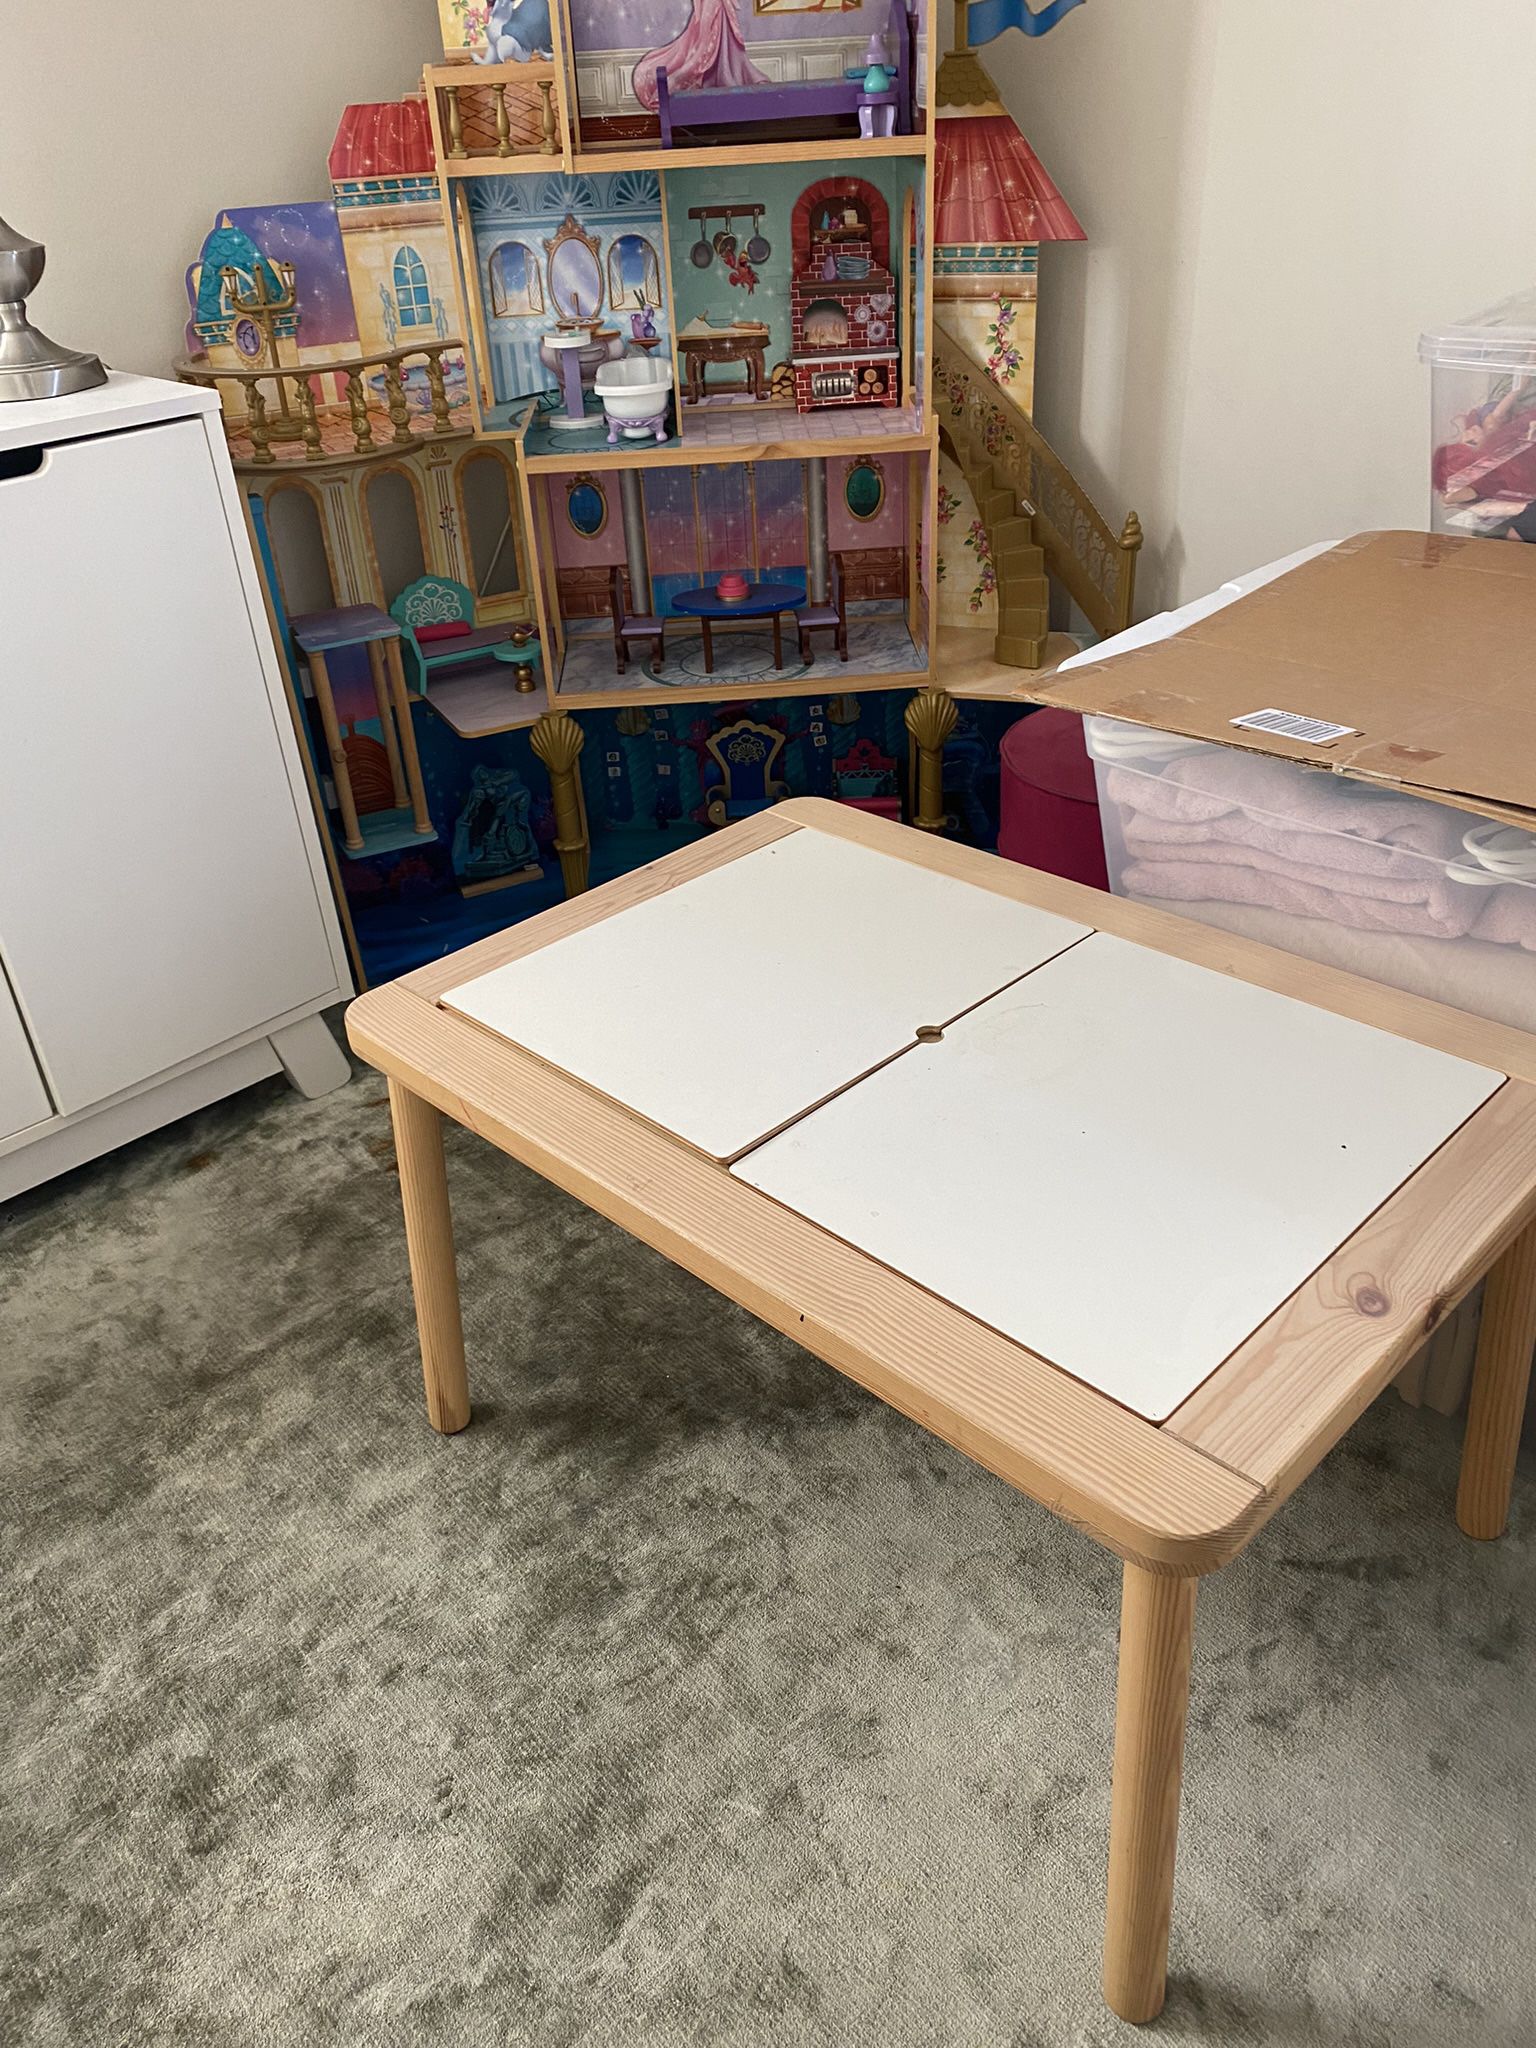 Kids art Table With 2 Stools And Supplies Storage